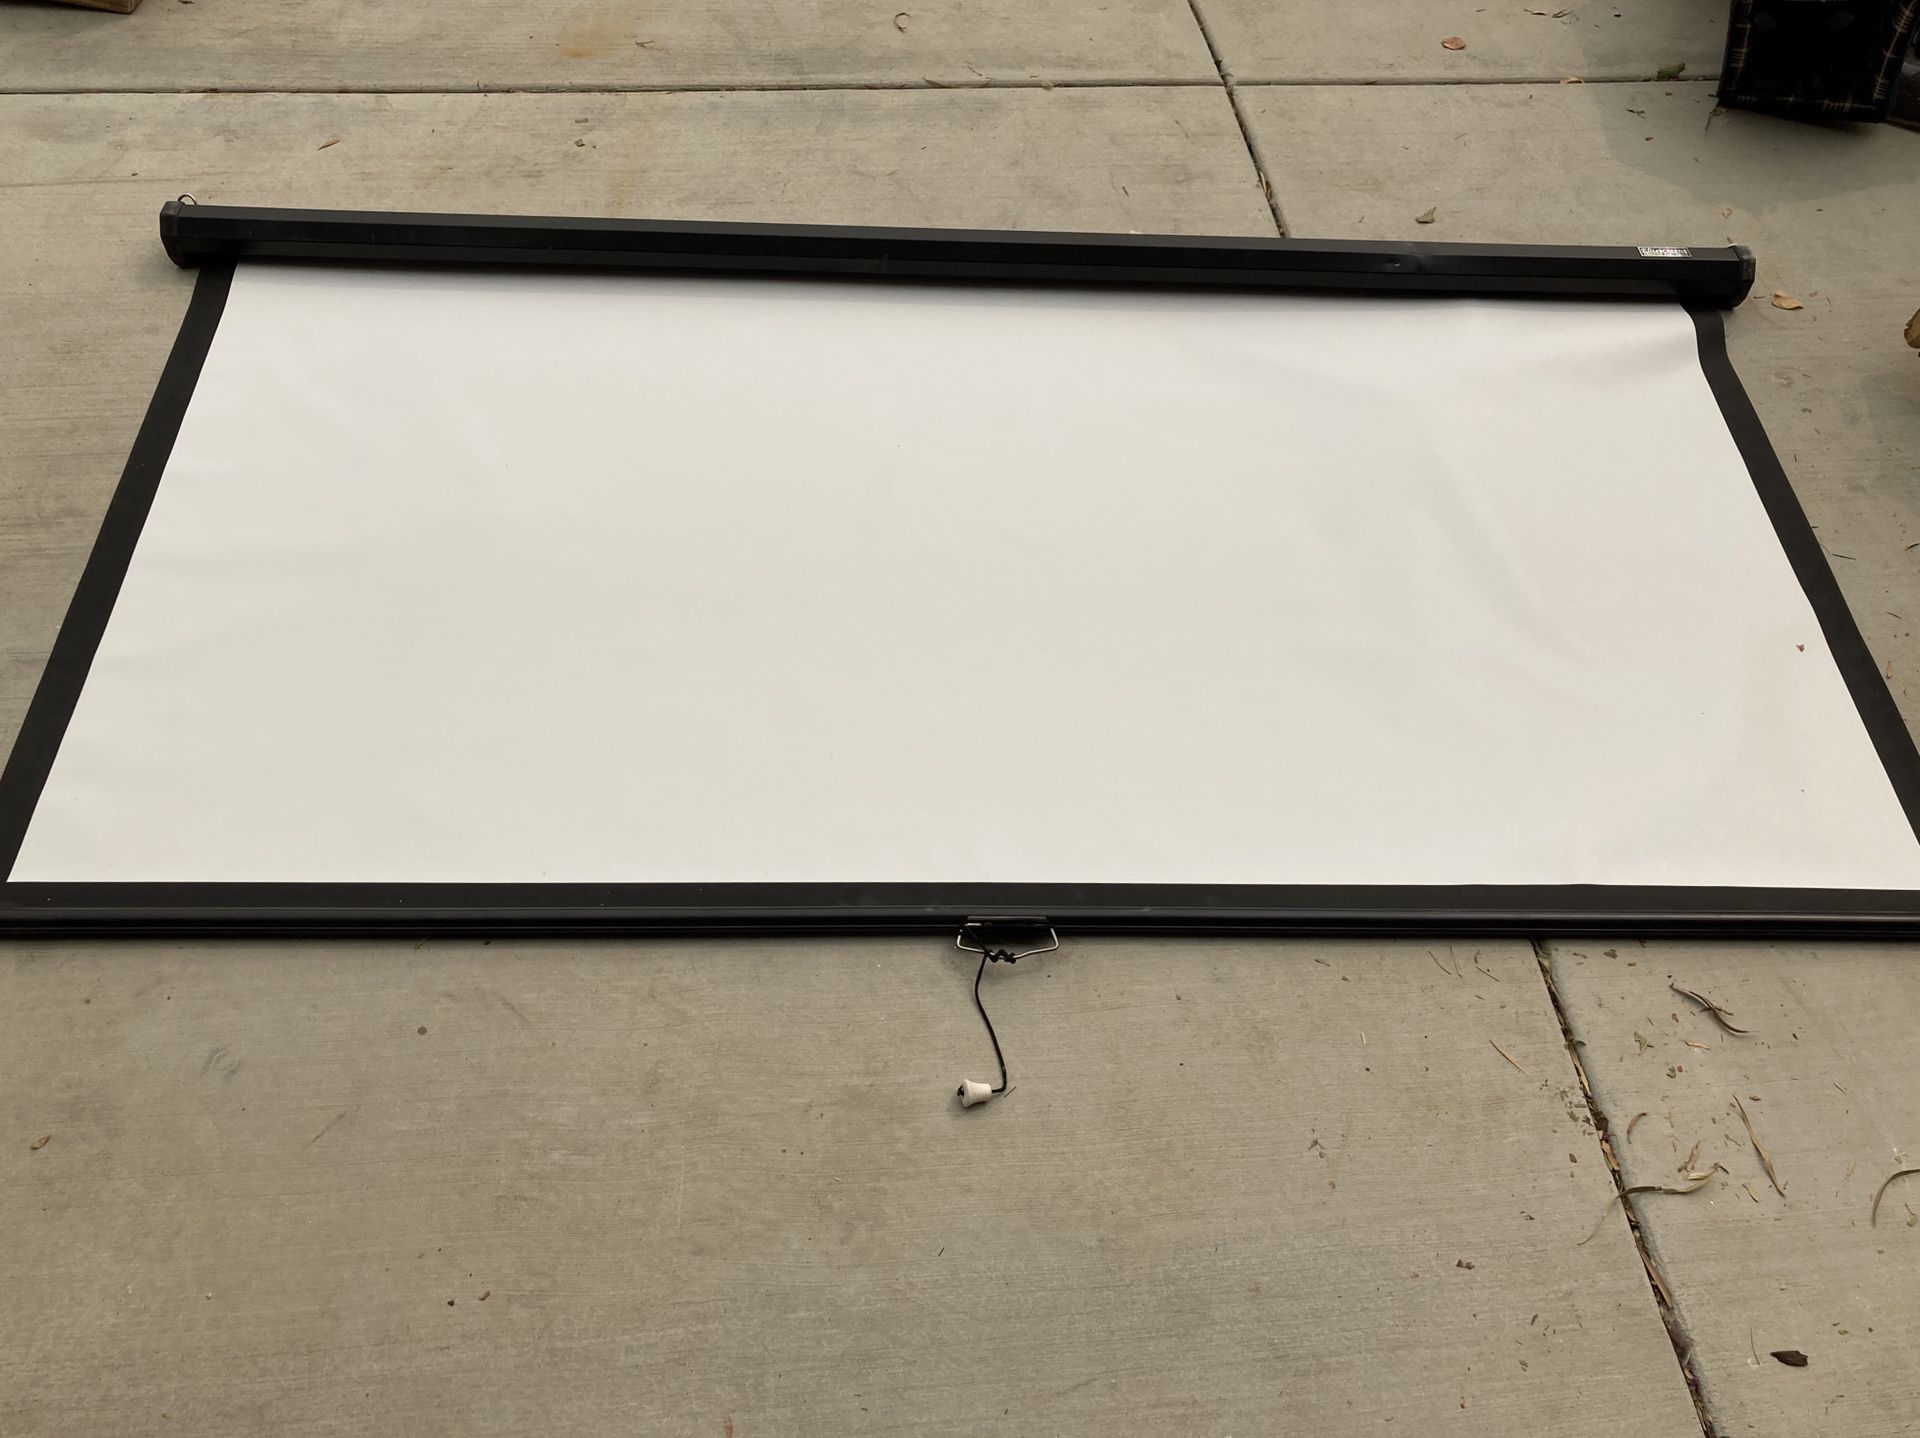 80” Projection Screen